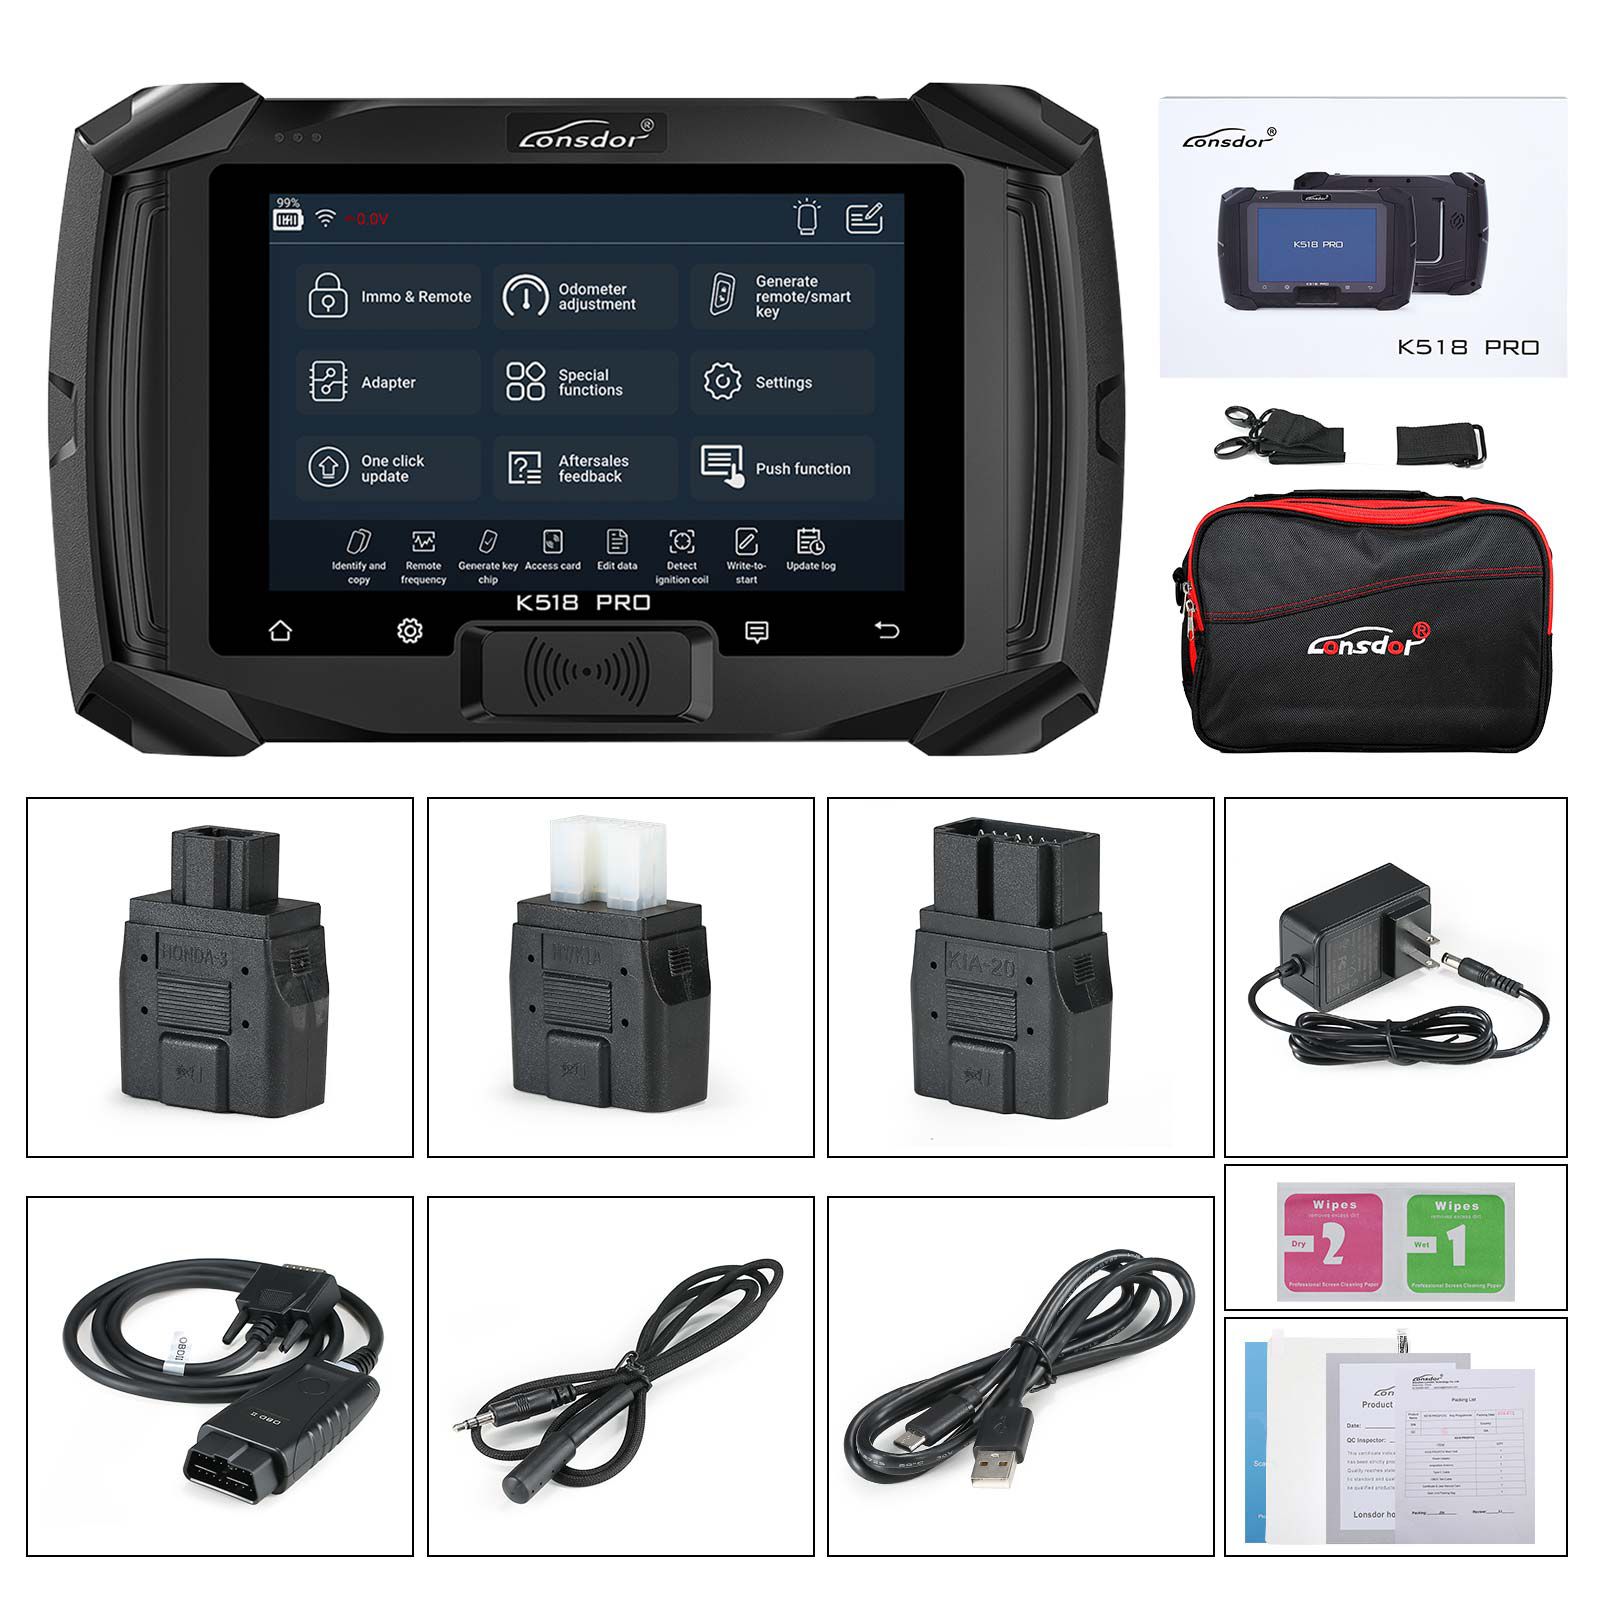 Newest Lonsdor K518 PRO FCV Version (Free Combination Version) All-in-One Key Programmer 5+5 Car Series Free Use Full Functions Free Update Lifetime